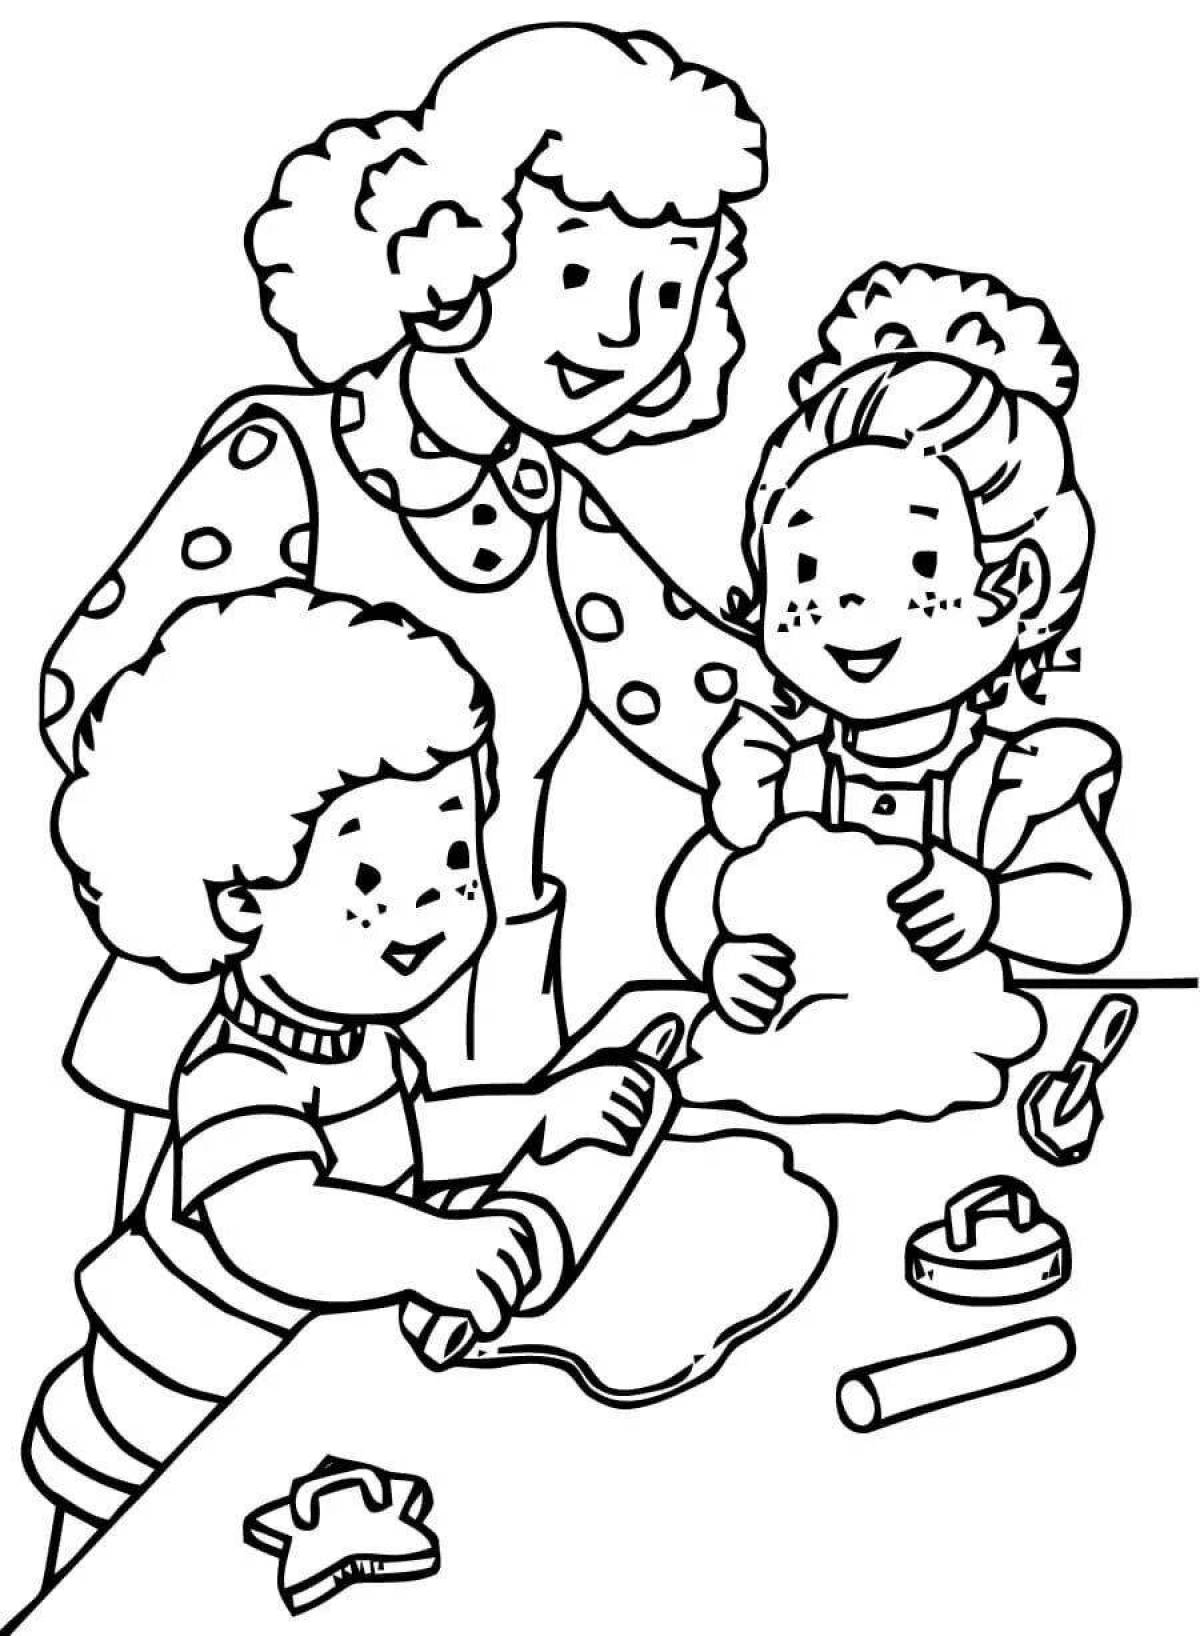 Satisfactory coloring help for parents